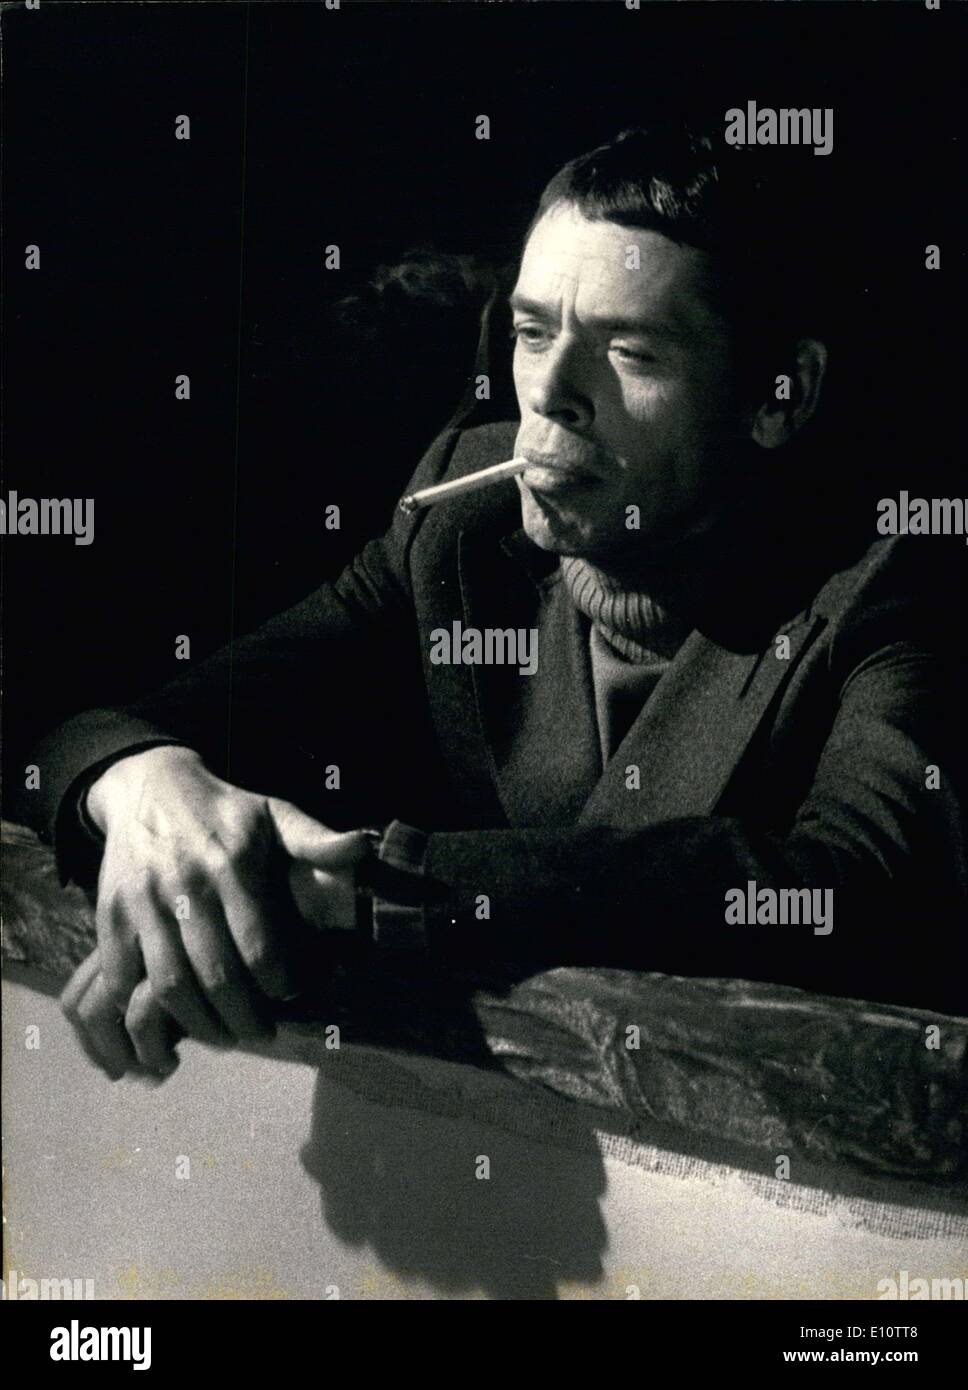 Feb. 07, 1974 - Jacques Brel (pictured) is starring in a new musical film that is being shot in Nice. Stock Photo